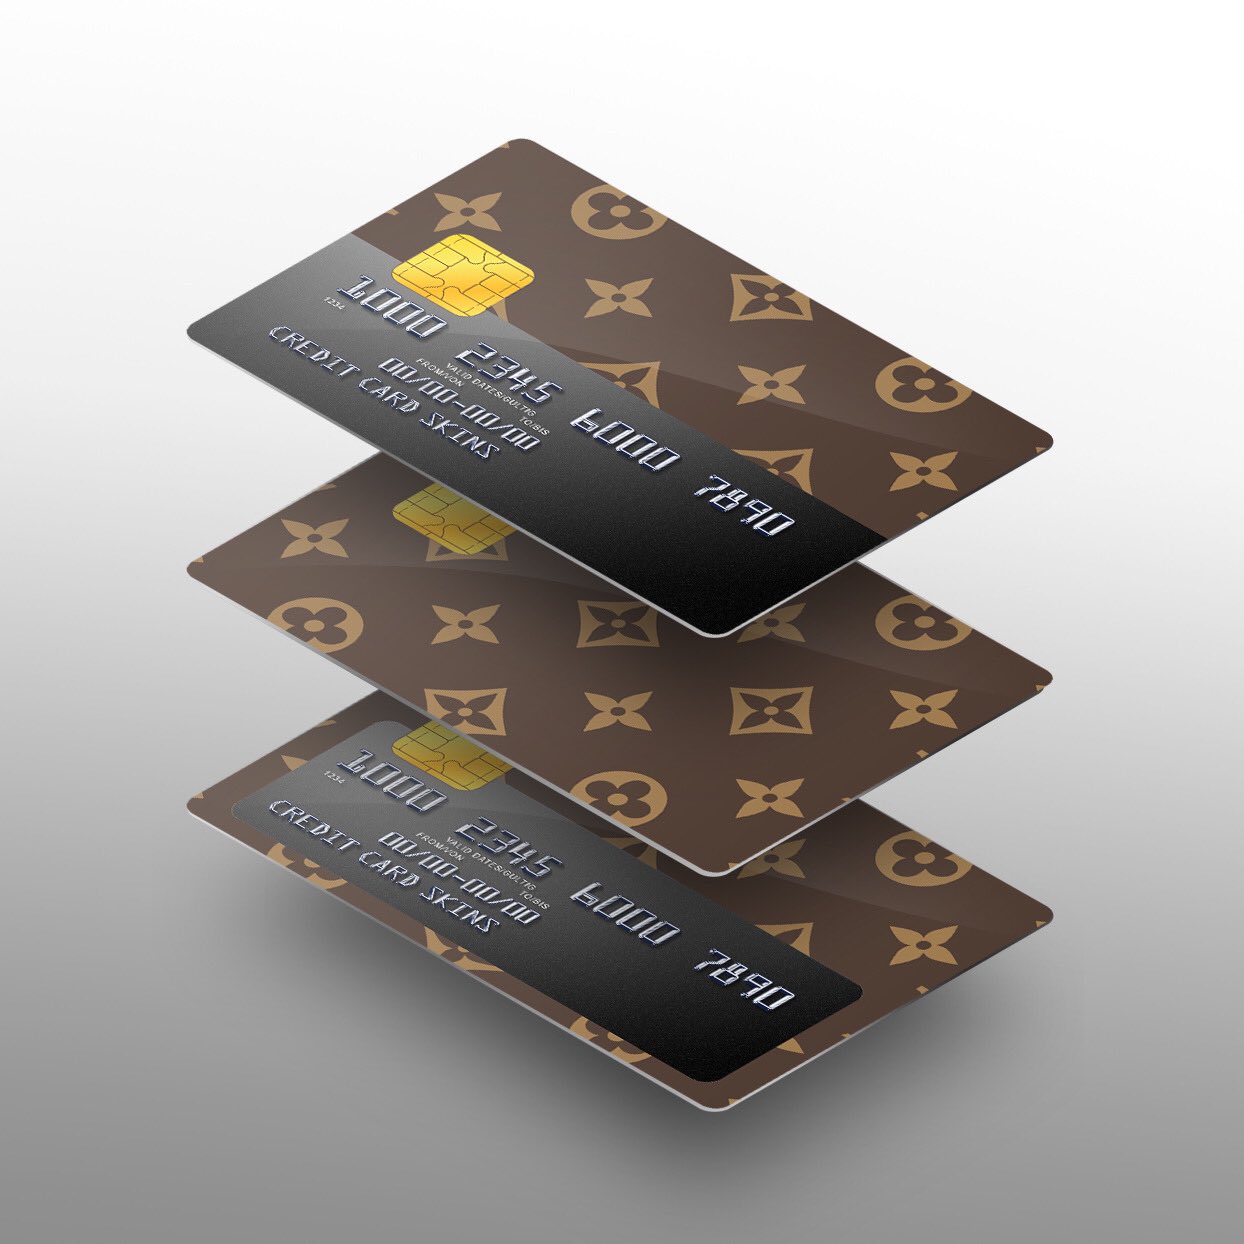 Customized my credit card with a louis vuitton credit card skin